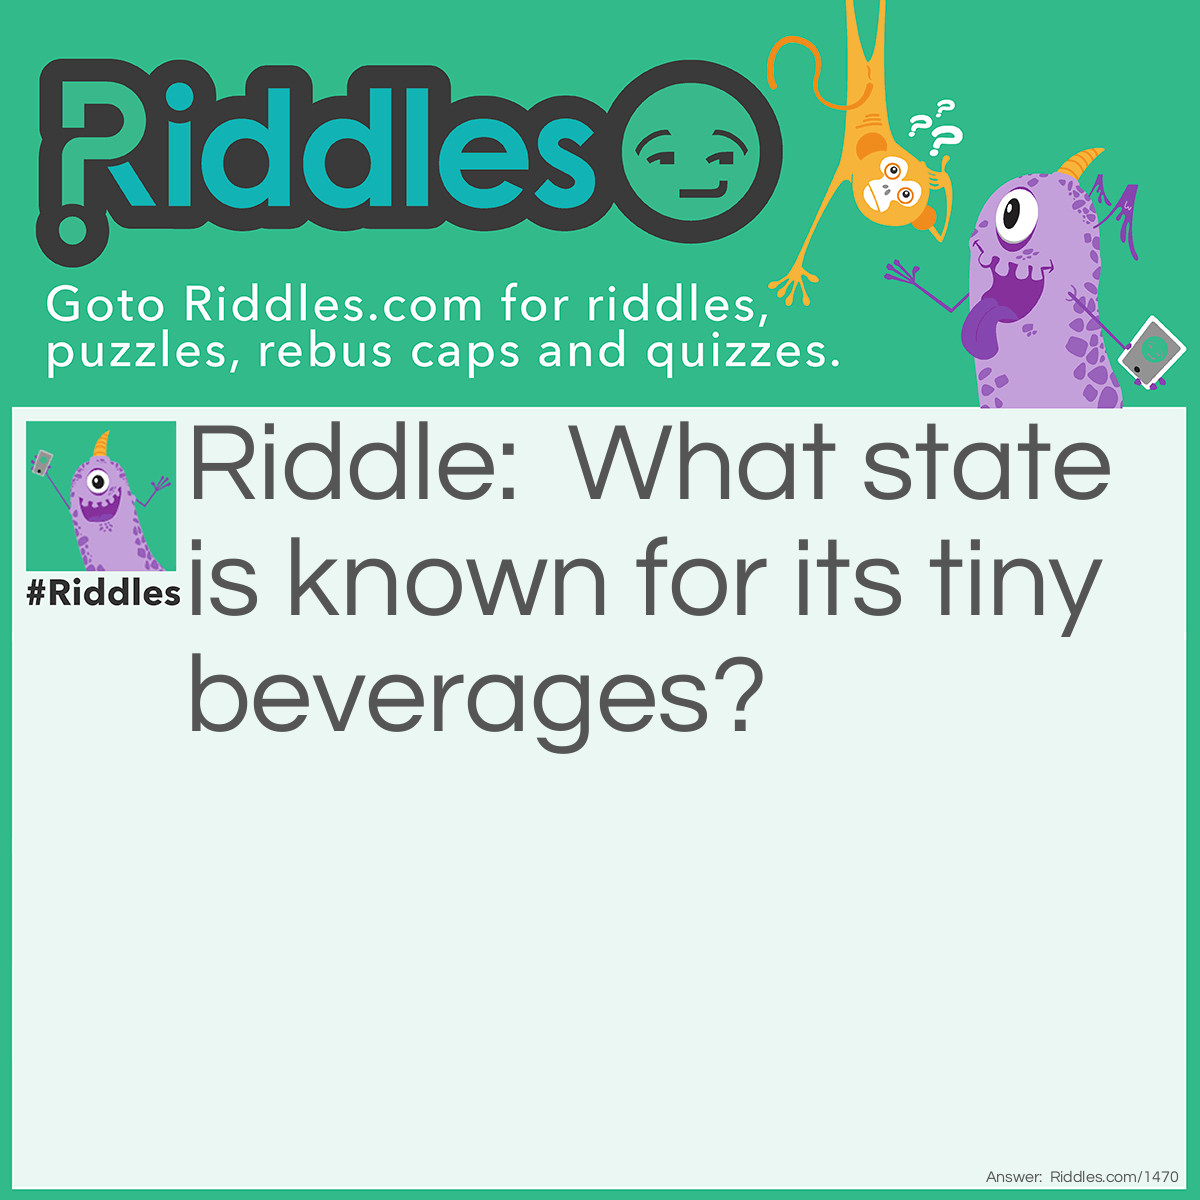 Riddle: What state is known for its tiny beverages? Answer: Minnesota! Mini-Soda.